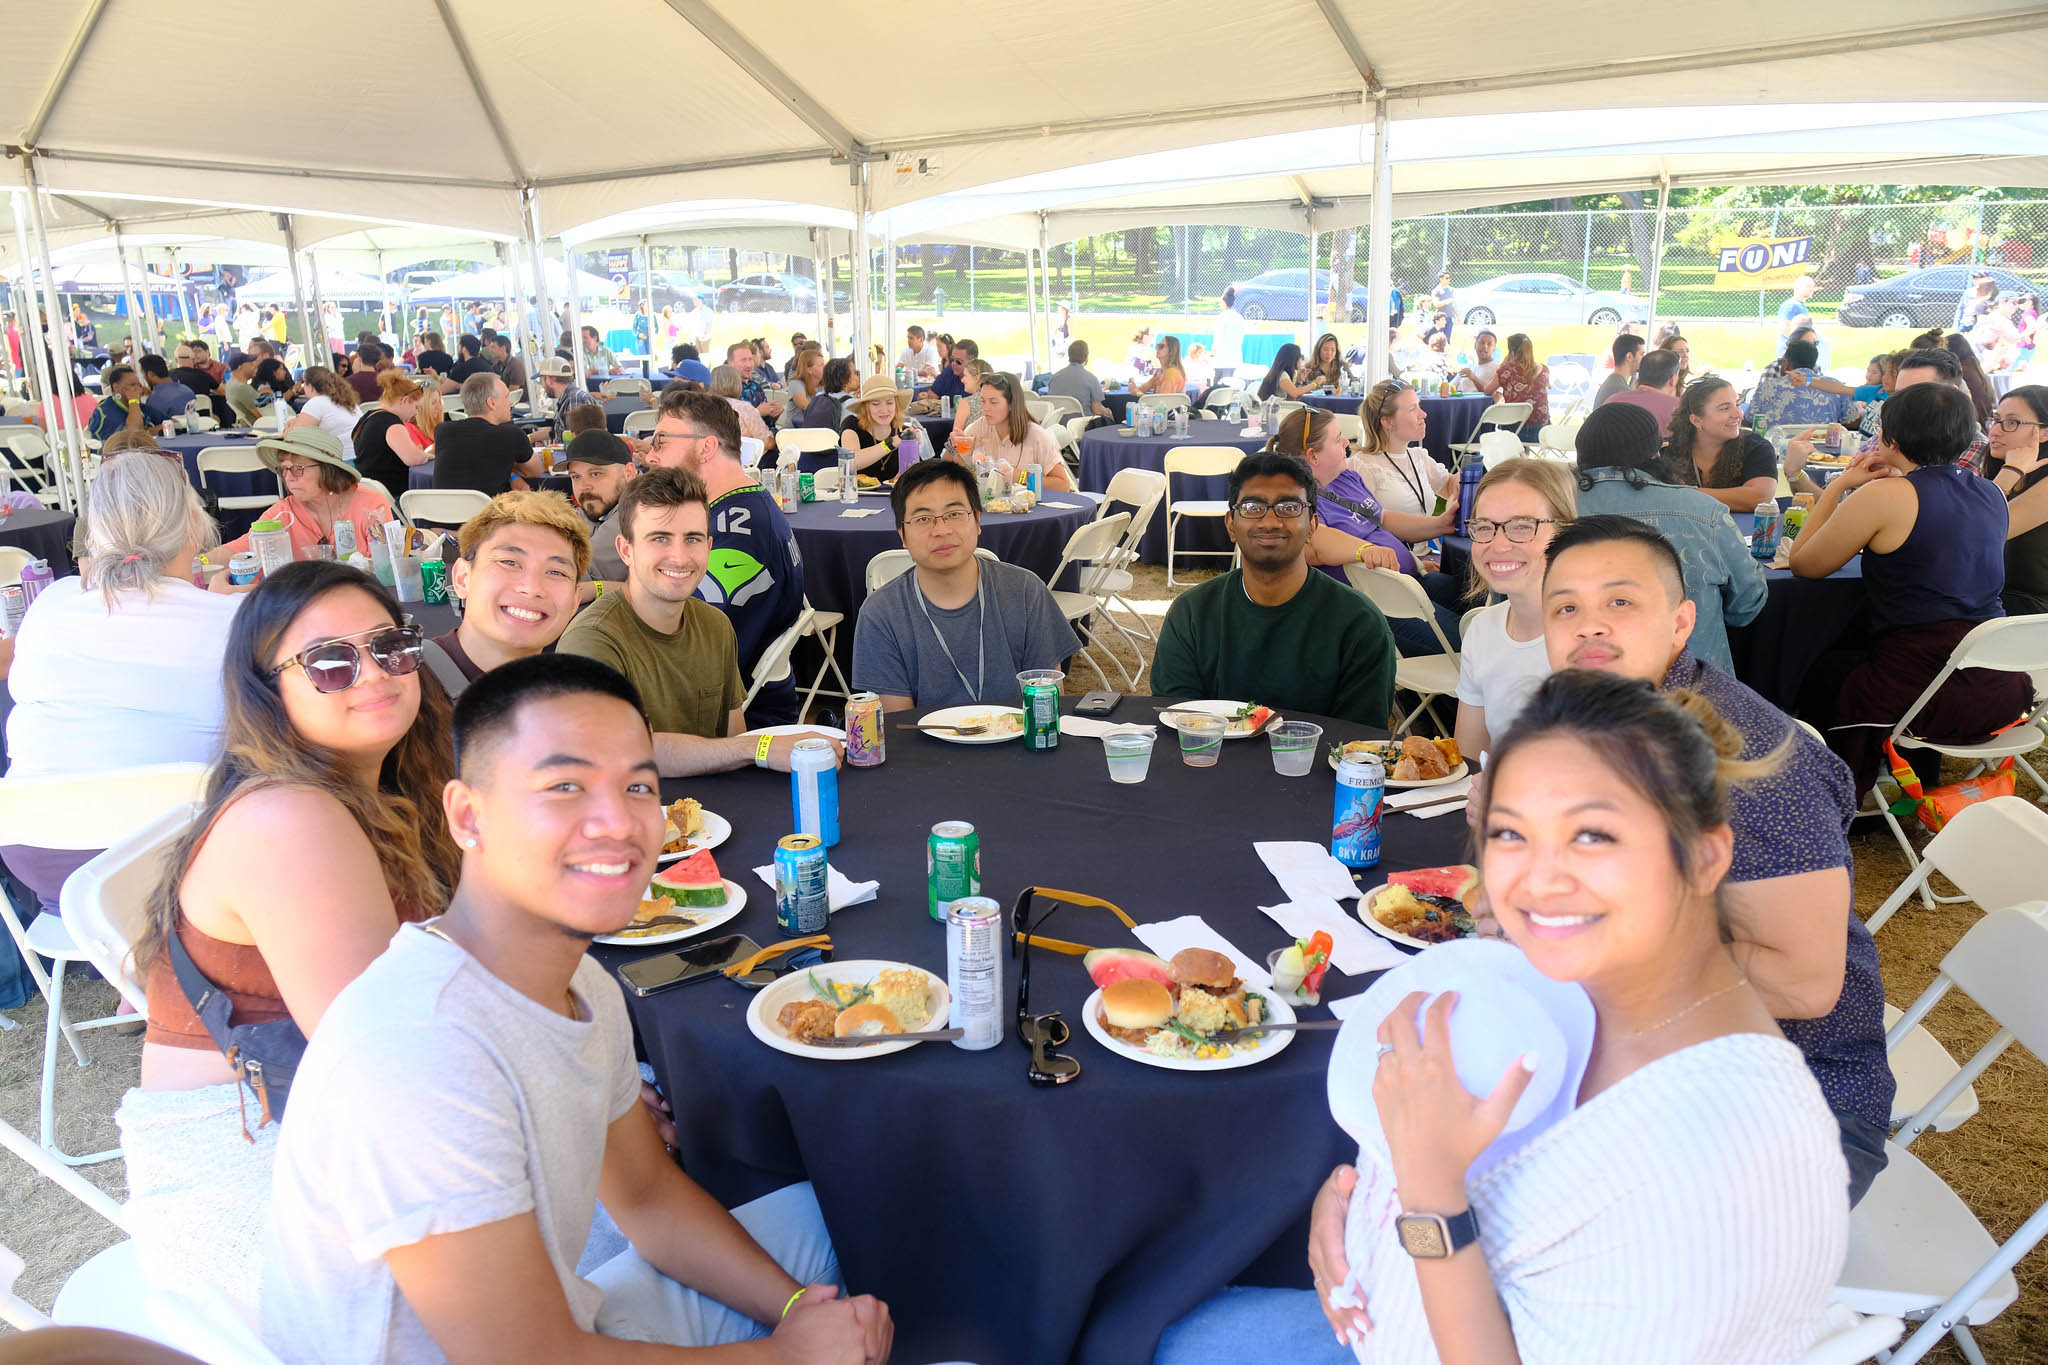 Allen institute staff seated at tables underneath a tent at a summer BBQ